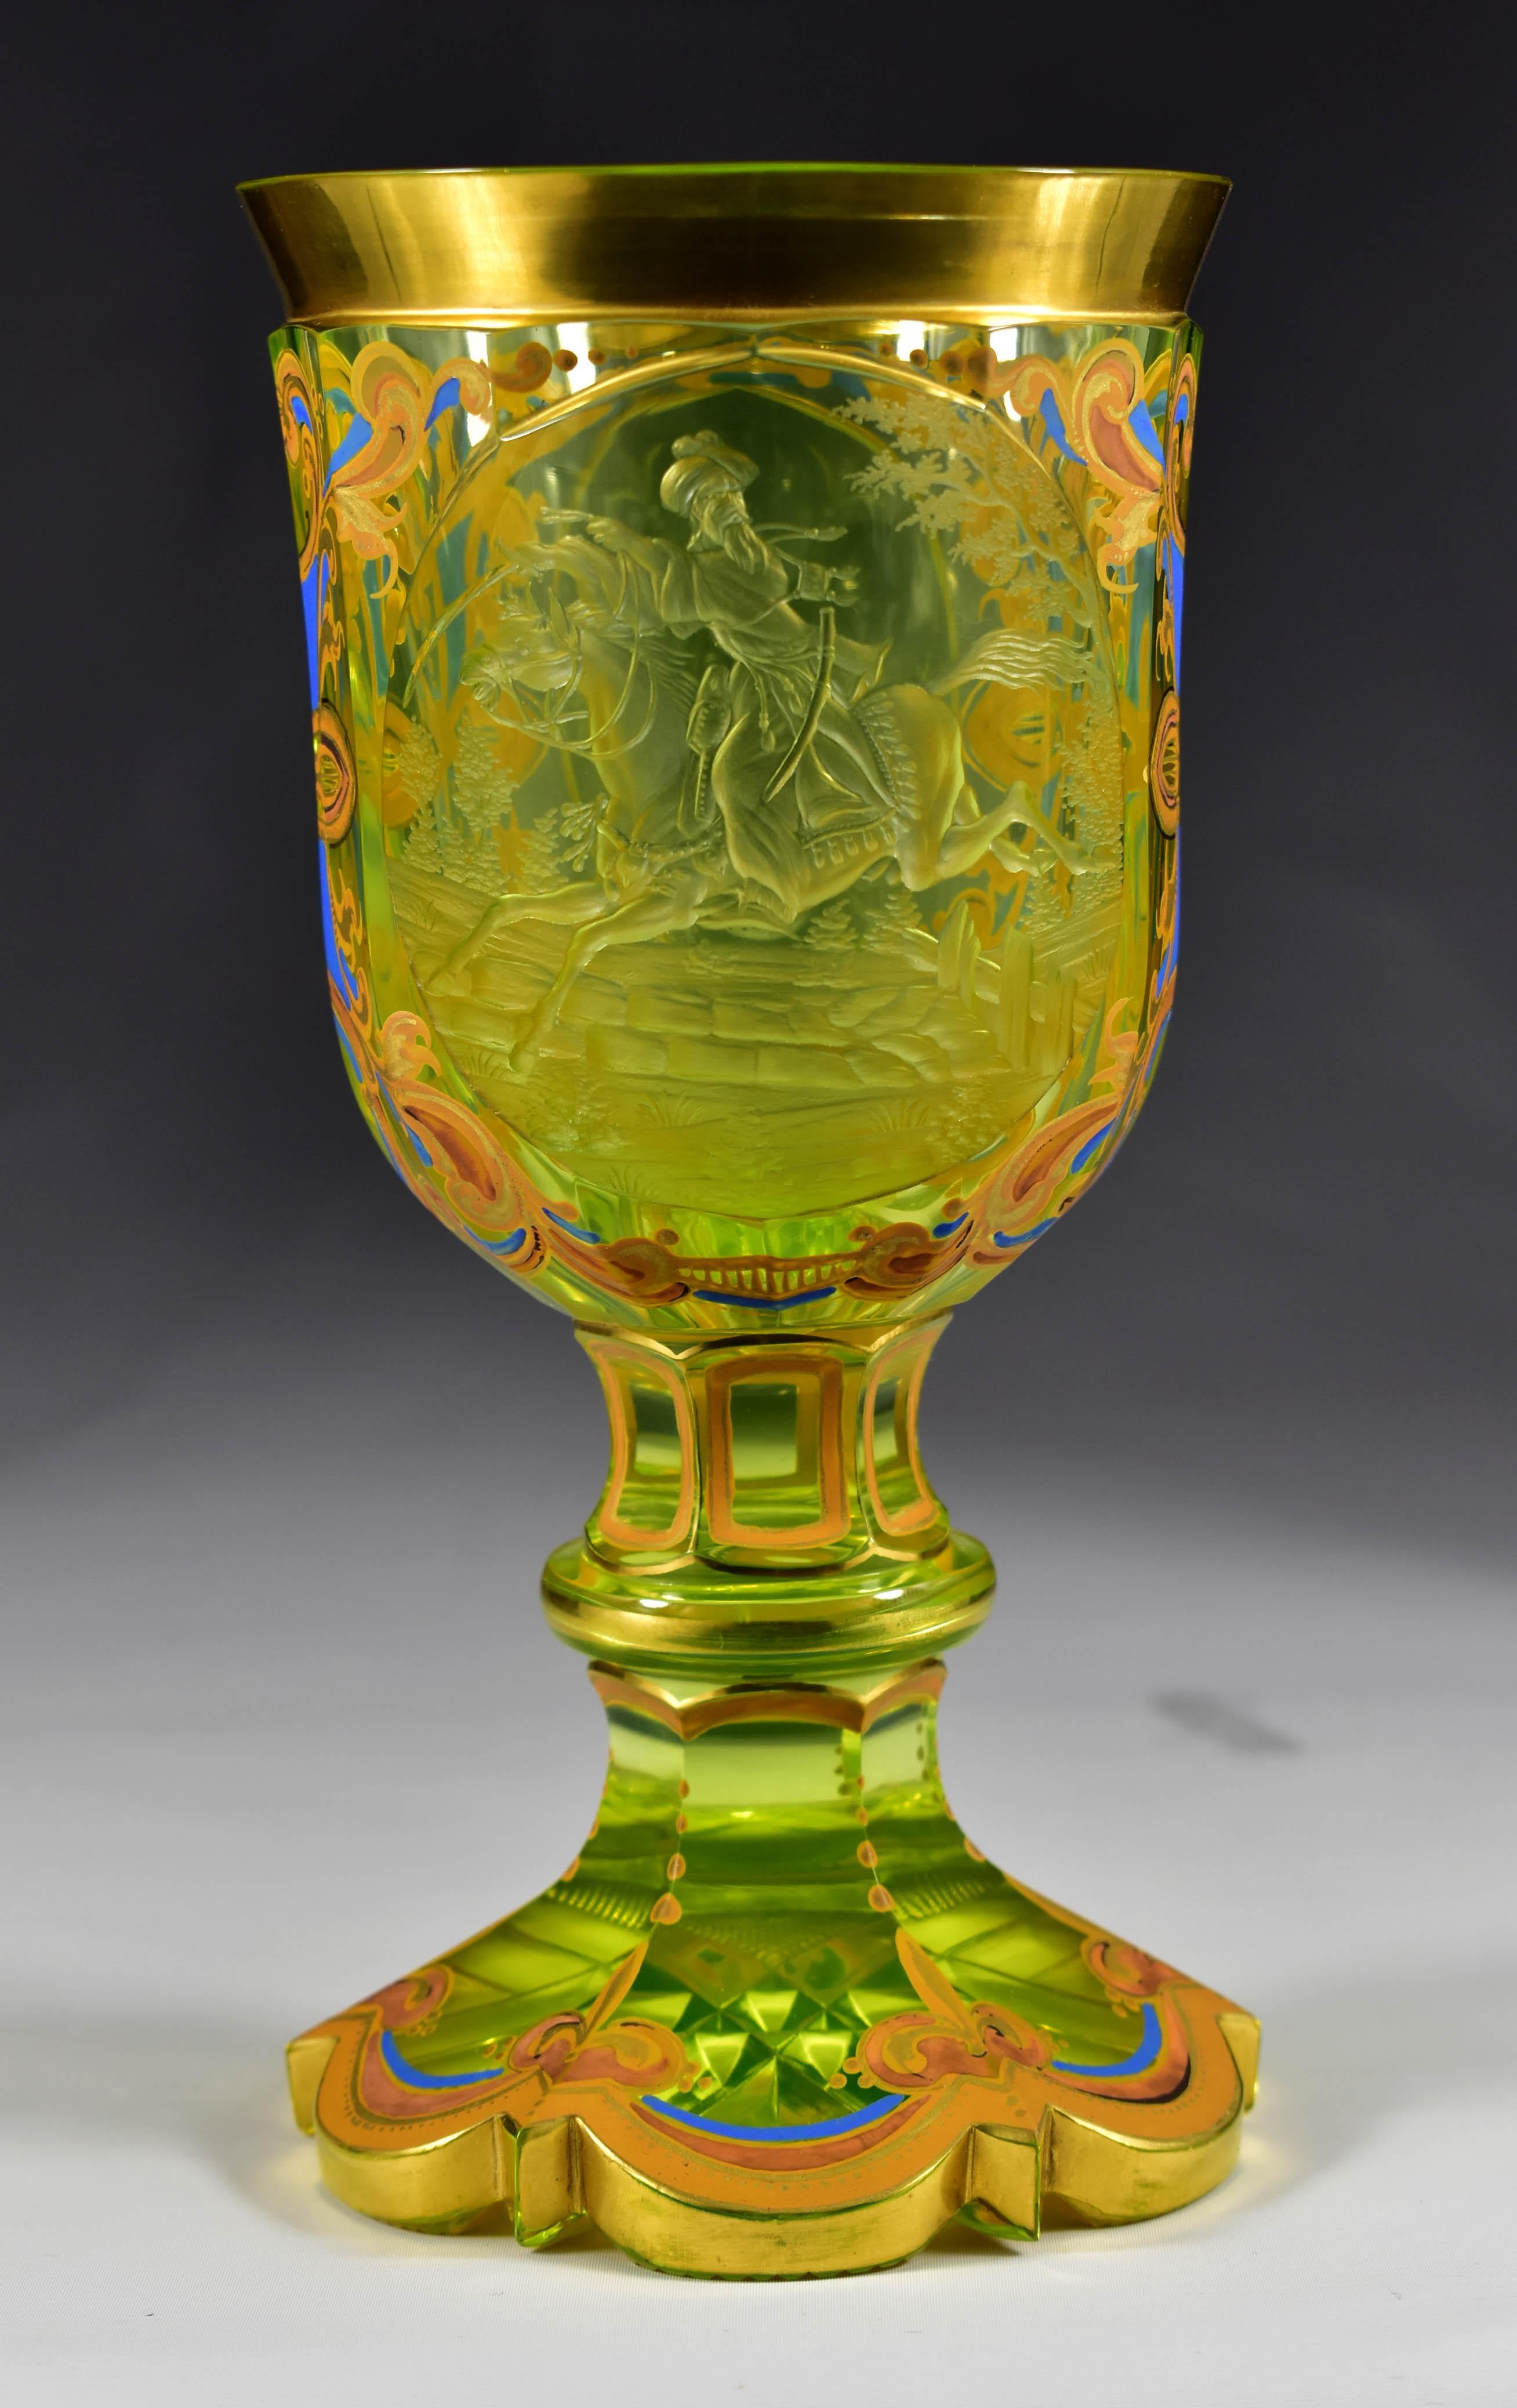 Beautiful cut uranium glass goblet decorated with painting and engraving. It is a facet cut with two medallions. There is also a beautifully cut bottom in the shape of a star. In the front medallion there is an engraving of a rider on a horse